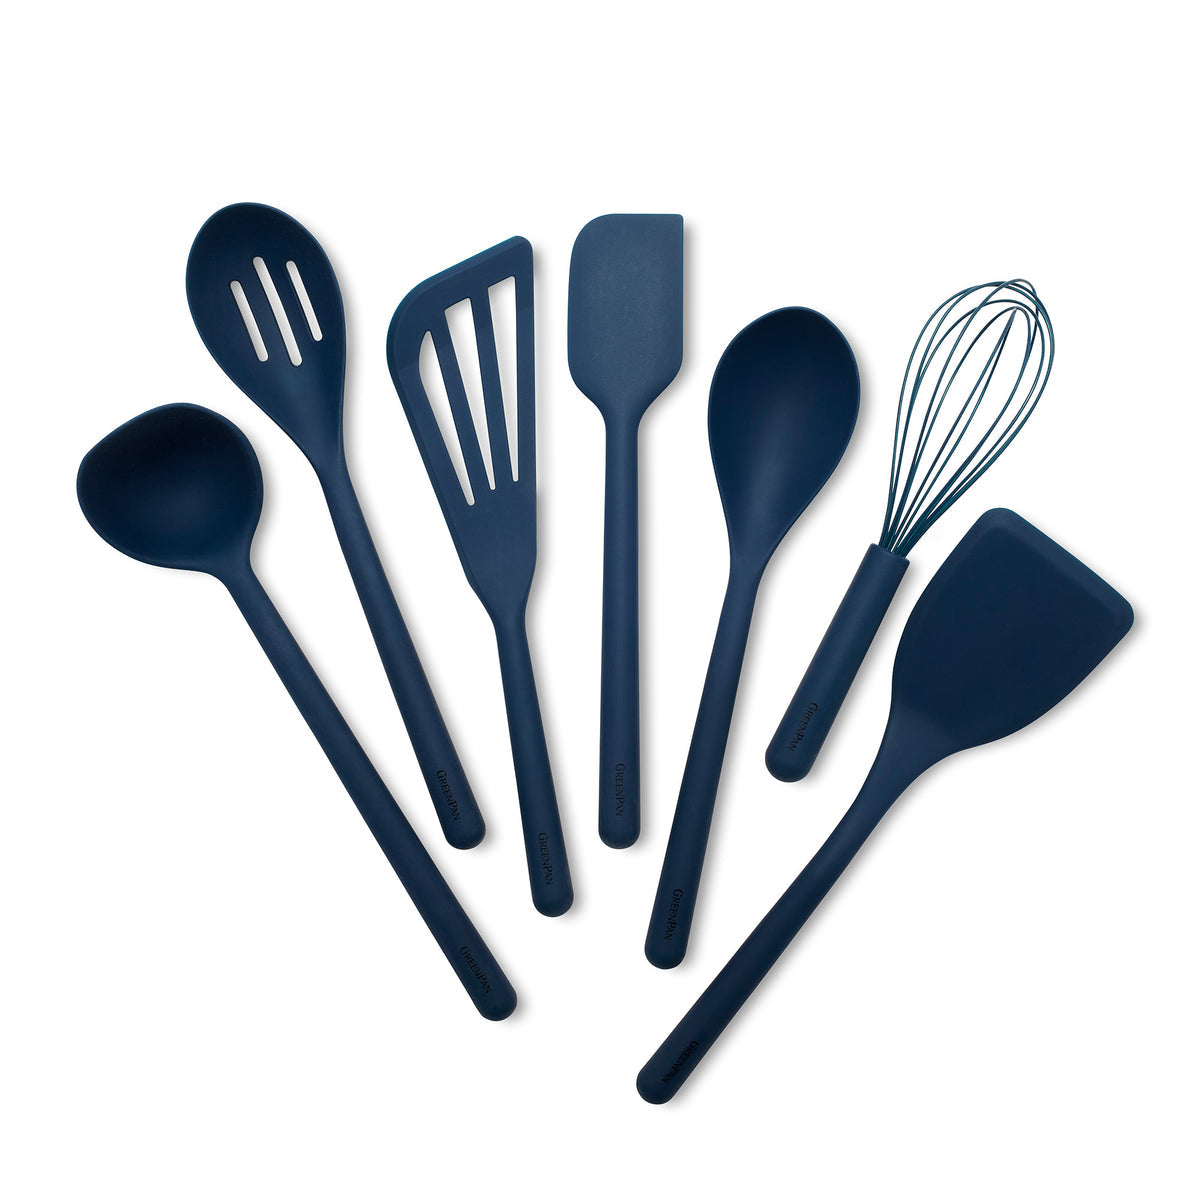 Healthy Non-Toxic PFAS Free Cookware - Platinum Silicone Tools 5-Piece Utensil Set by GreenPan